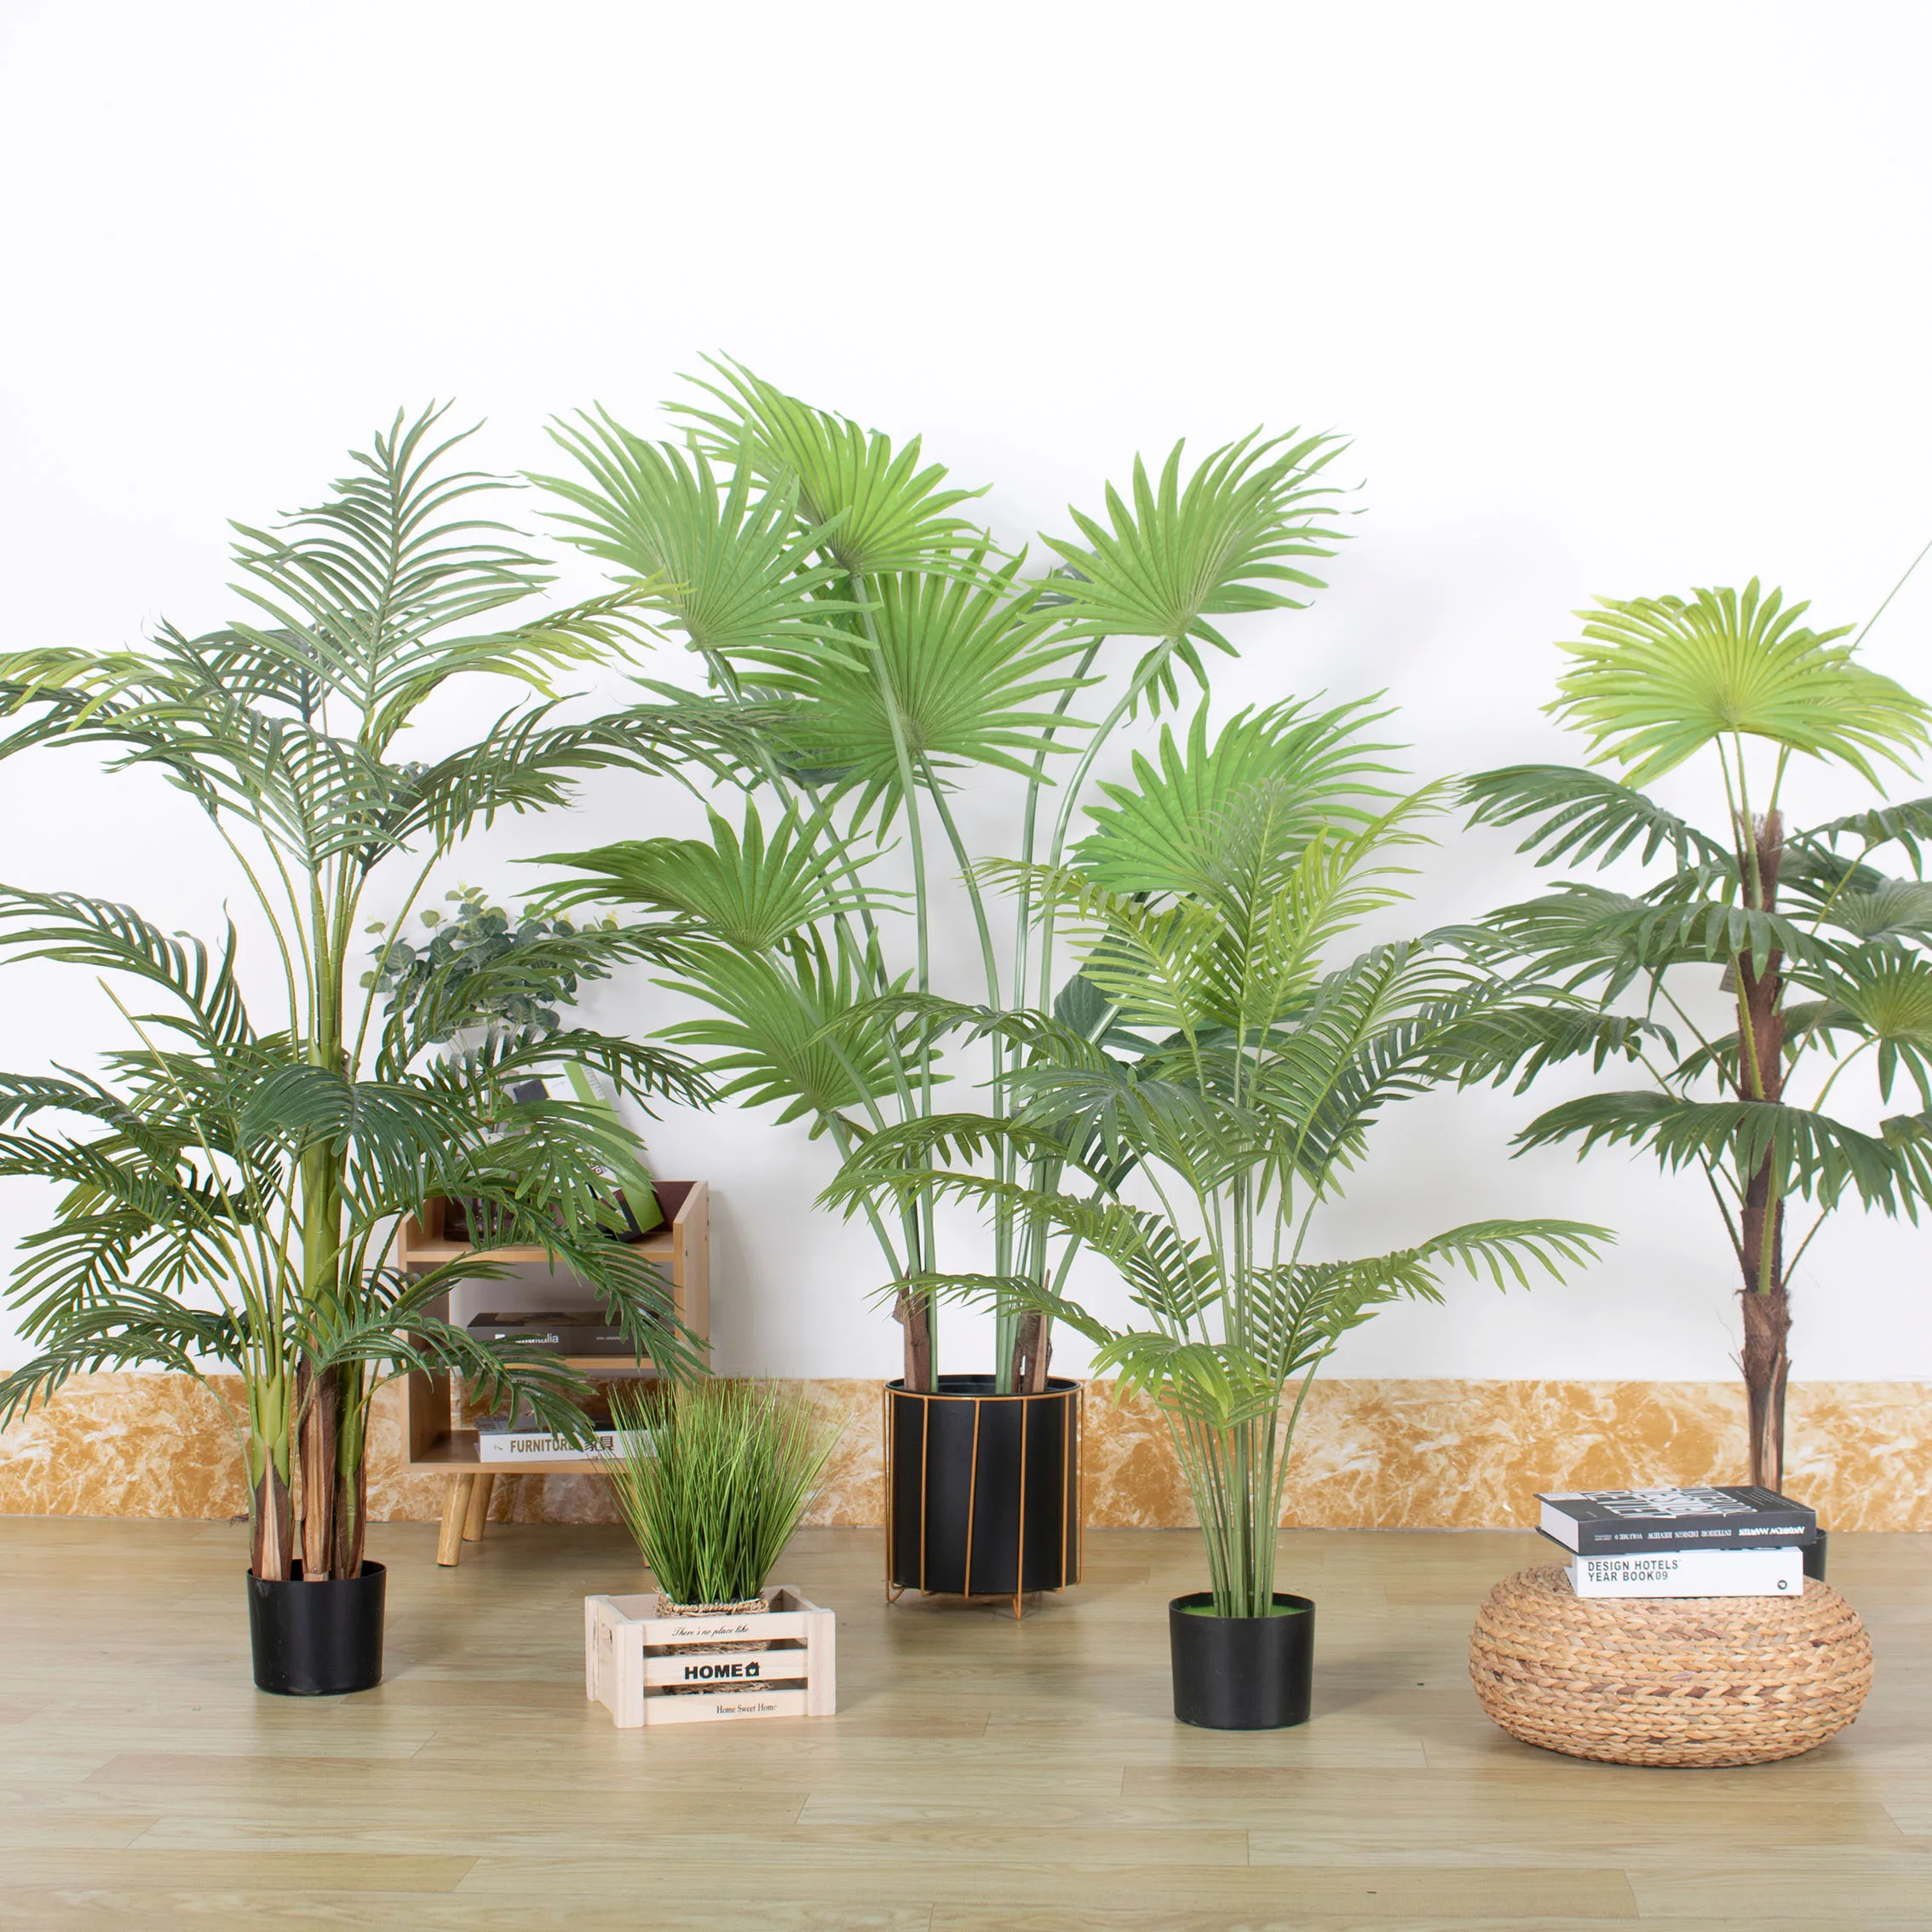 Simulation Plant Artificial Small Potted Green Plastic Areca Palm Tree For  Cheap Price Plastic Plants Artificial   Buy Plastic Areca Palm ...